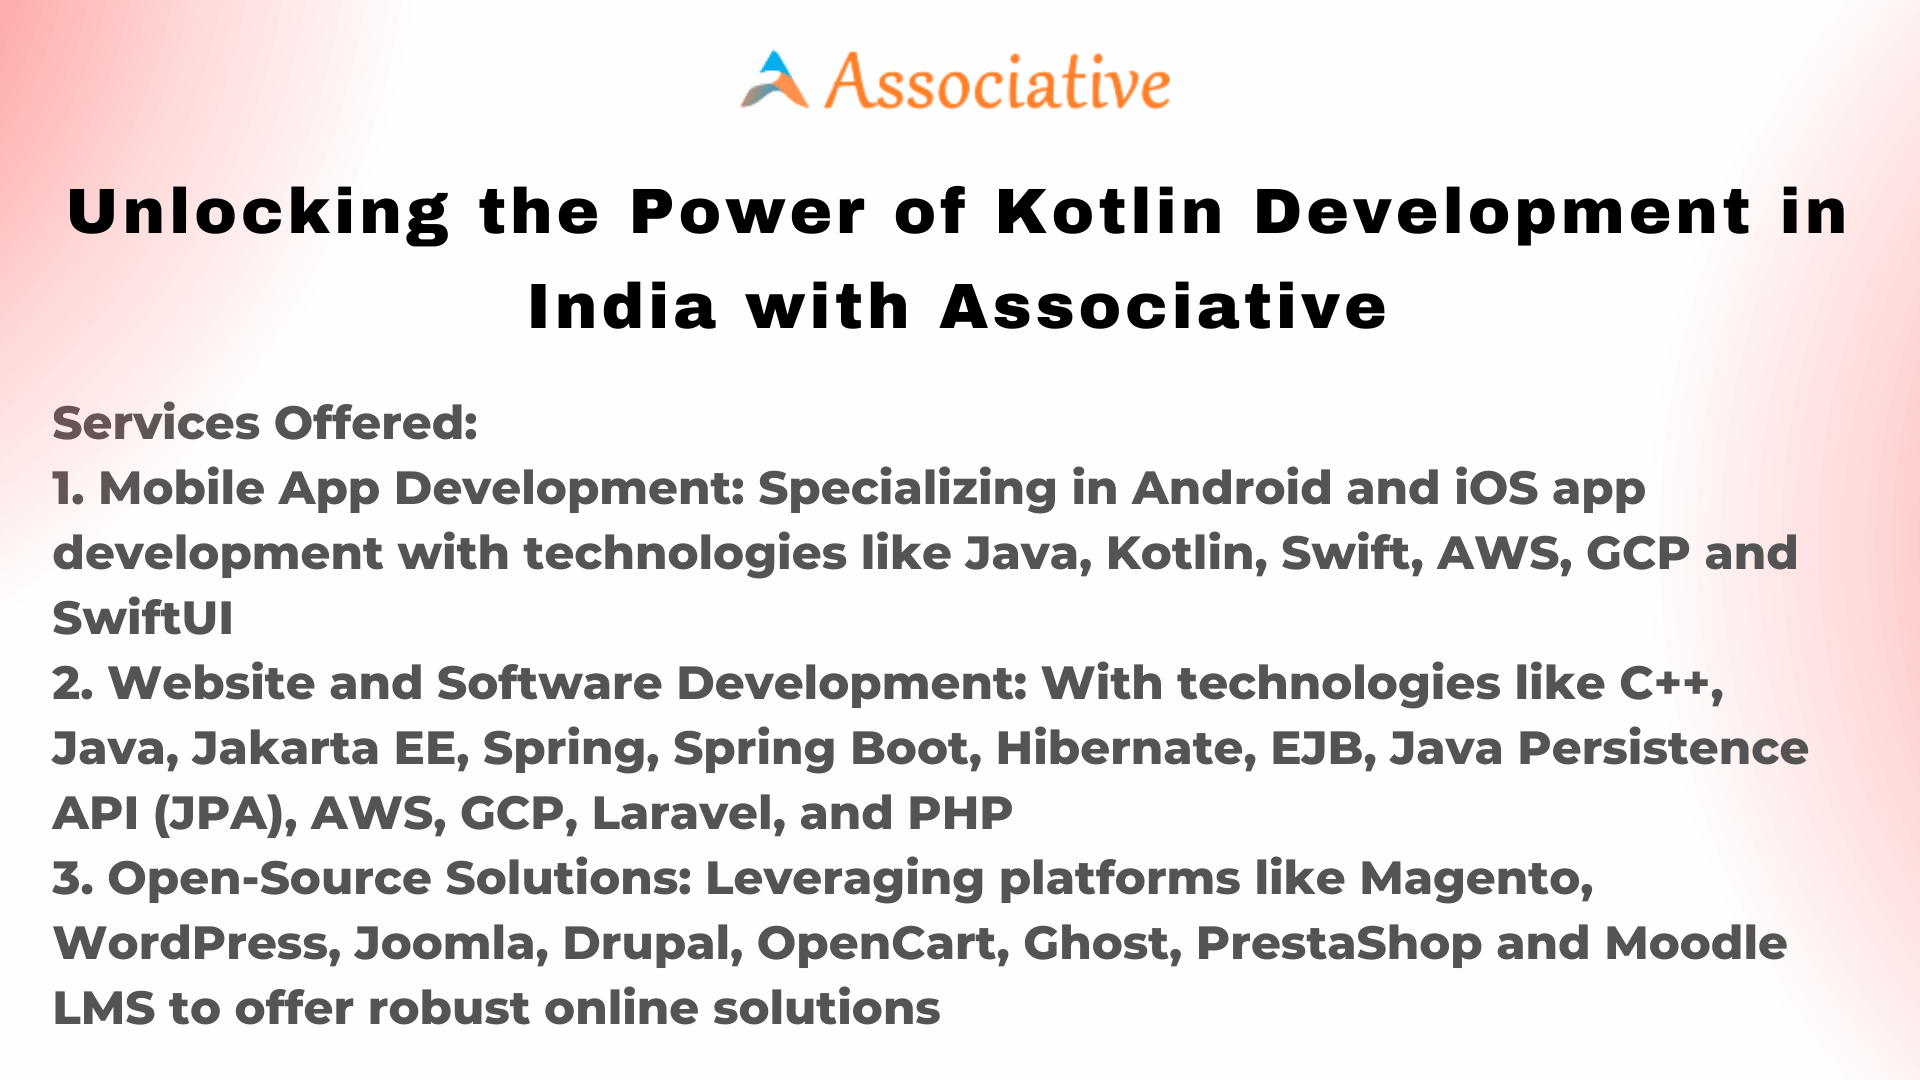 Unlocking the Power of Kotlin Development in India with Associative